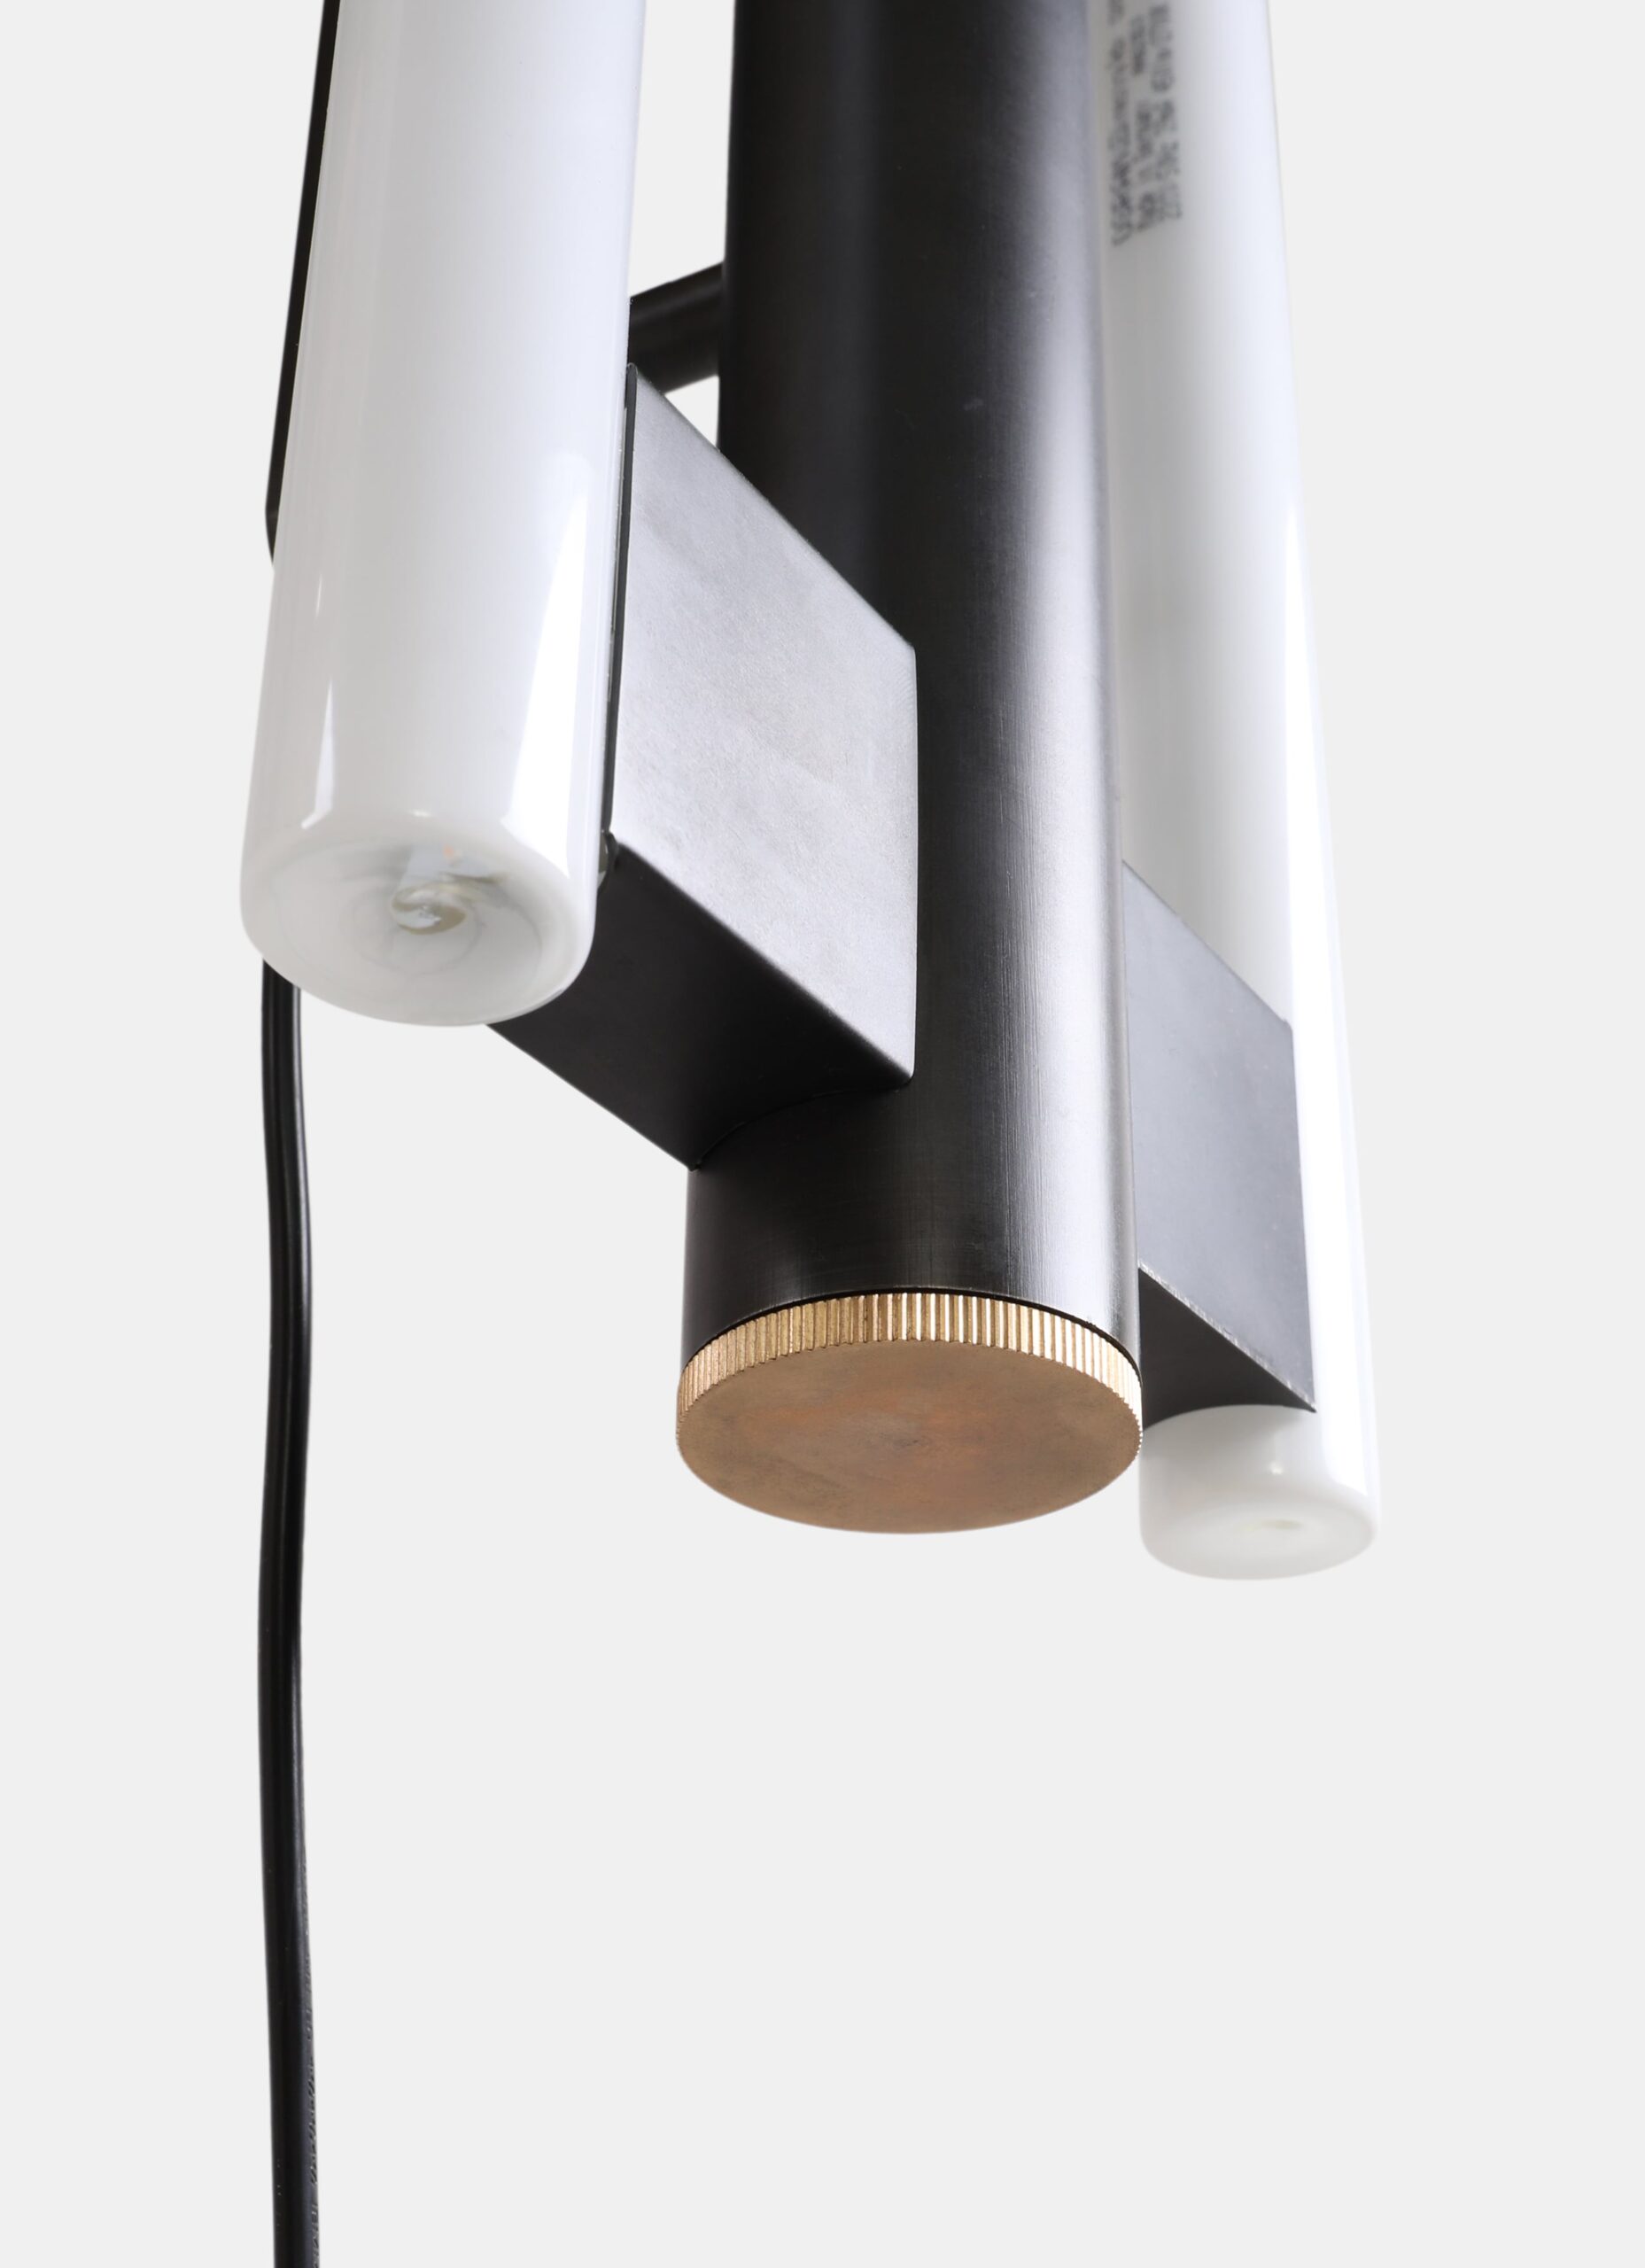 Features – Easy to mount with two screws (not included) – EU plug – Eiffel can be dimmed using the brass end piece of the lamp – Bulbs are included (6 W LED) Materials / Dimensions – Waxed raw steel, plated brass dimmer, black silicon wire – H 53,5 / W 12,5 / D 10,8 cm Design – Krøyer Sætter Lassen, 2015 – Permanent Collection